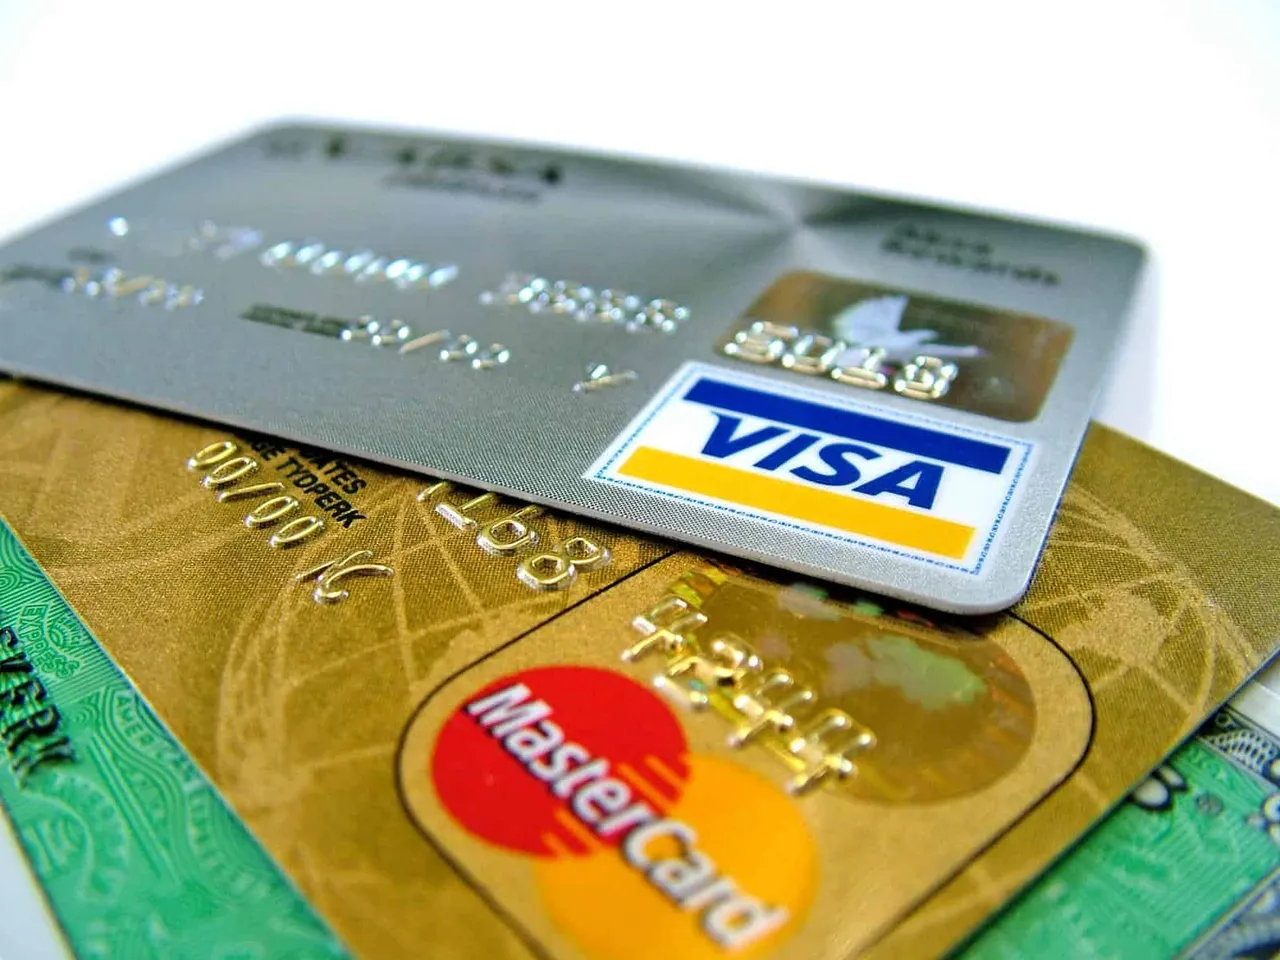 Visa one of the worlds largest payment